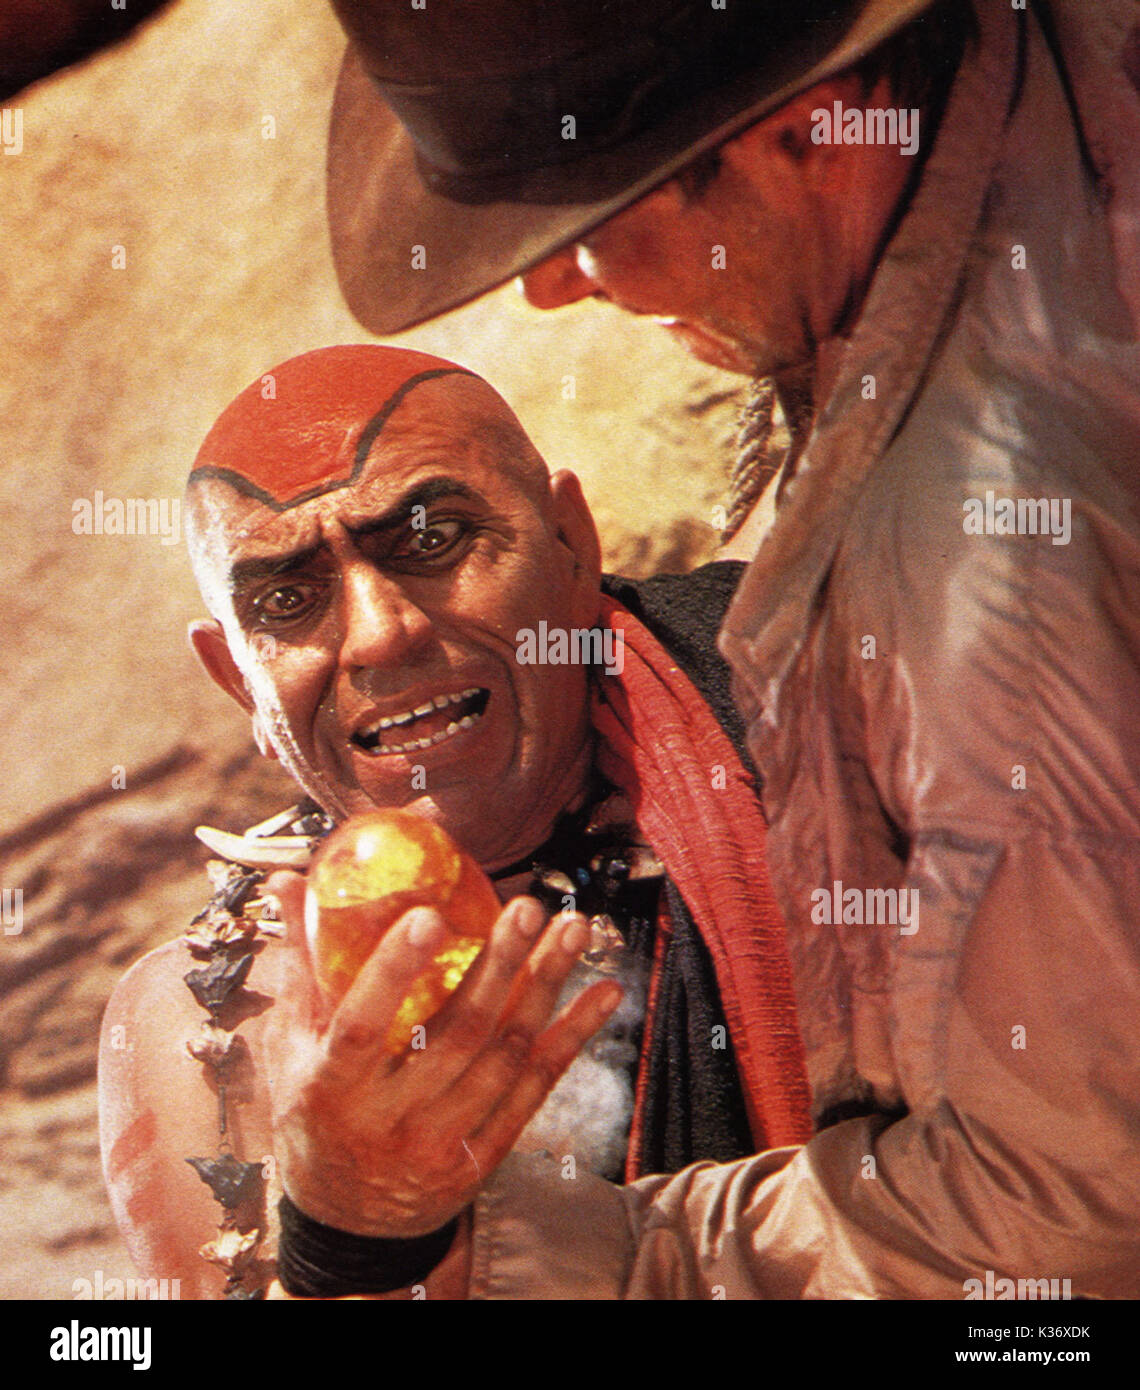 INDIANA JONES AND THE TEMPLE OF DOOM AMRISH PURI AS MOLA RAM A LUCASFILM     Date: 1984 Stock Photo